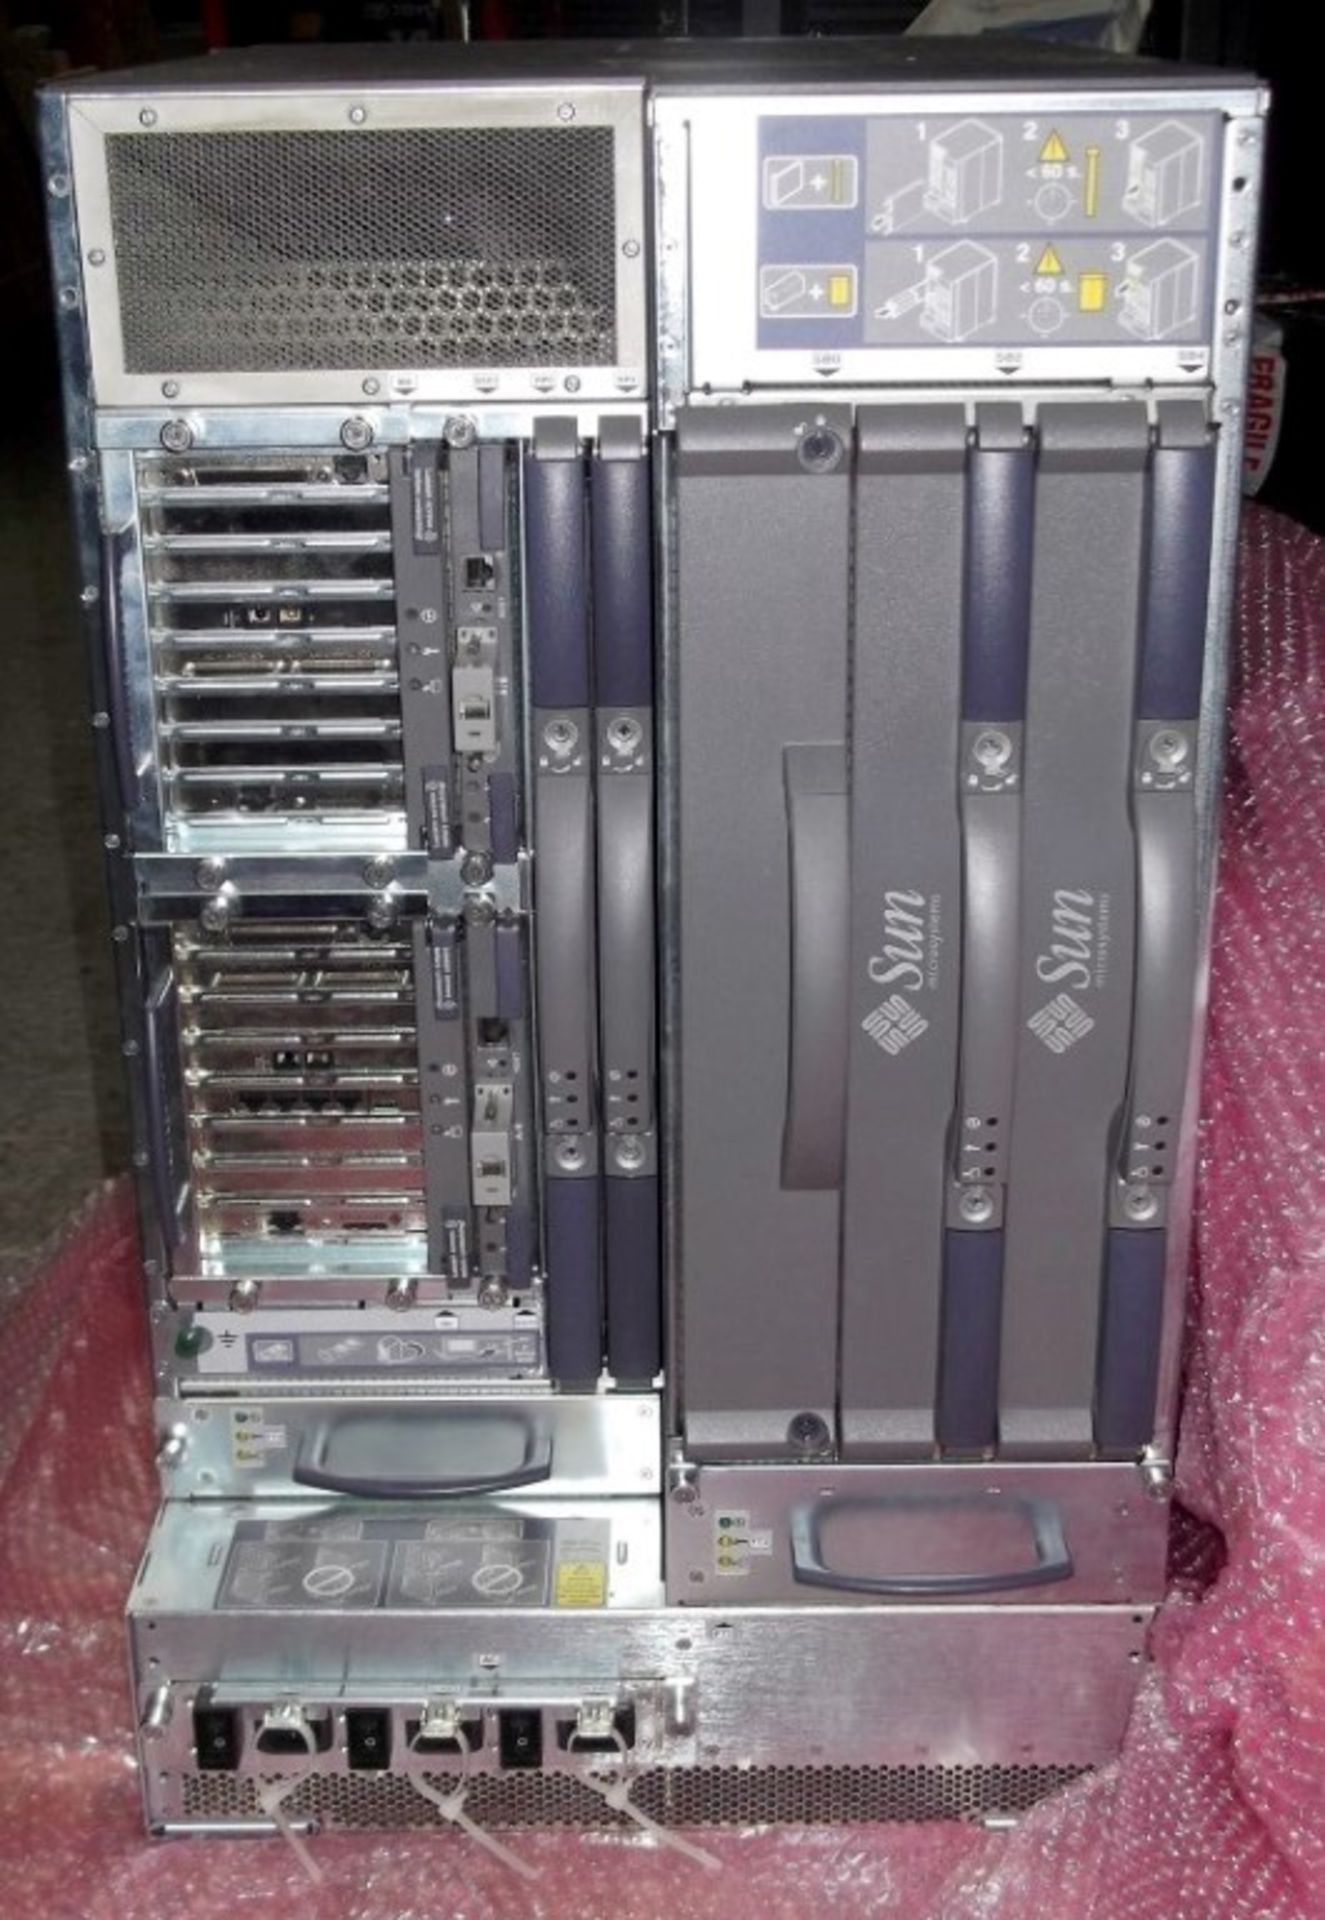 1 x Sun Microsystems Sun Fire 4800 Midframe Server - Ref NSB014 - Recently Removed From A Working - Image 7 of 8